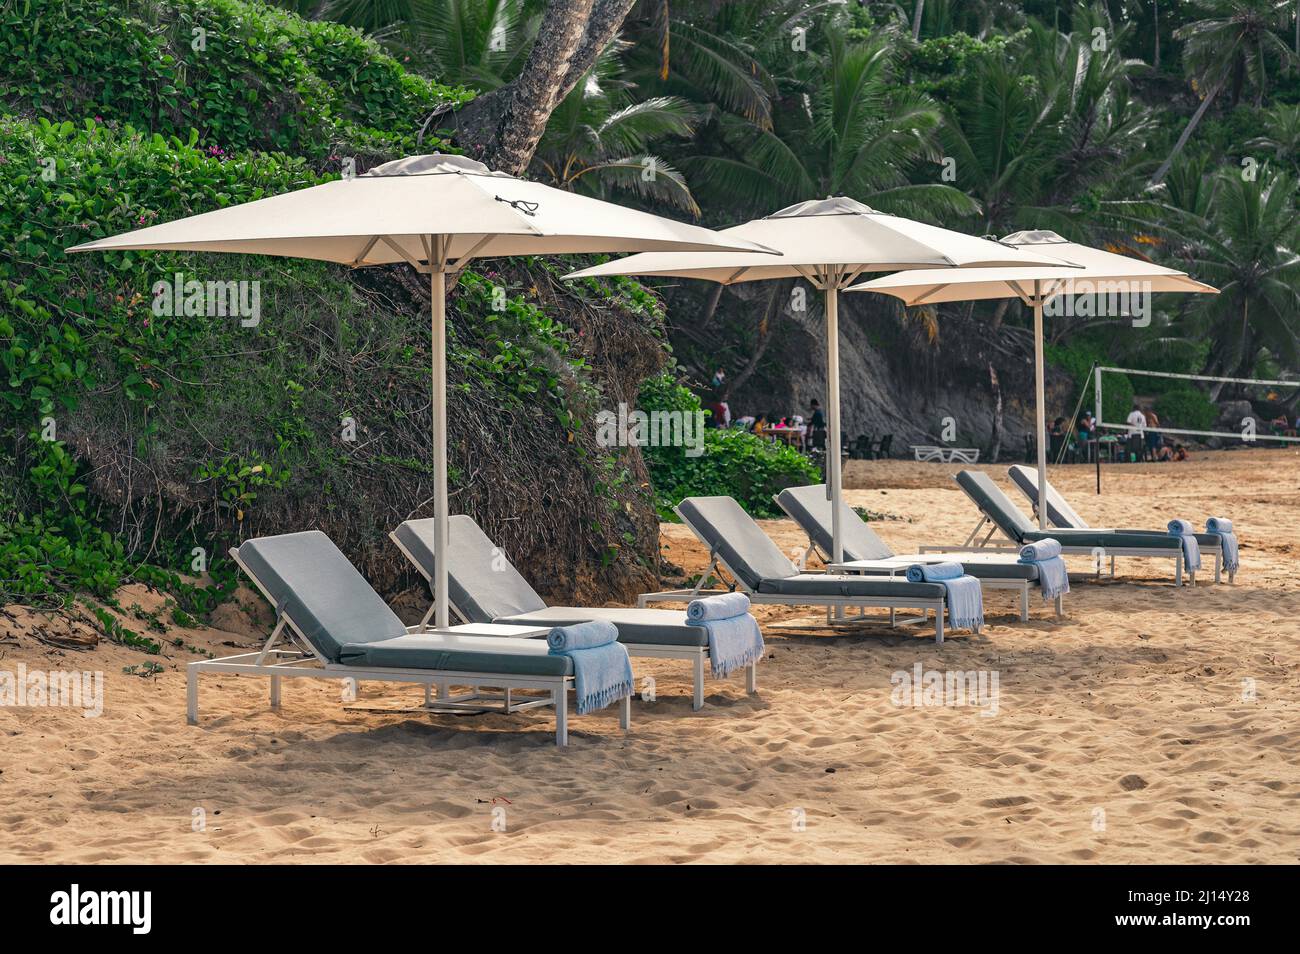 Photo shows Atlantic Ocean beach. Caribbean coastline has yellow sand. Loungers for relaxation and sunbathing are visible. In addition to sun loungers Stock Photo